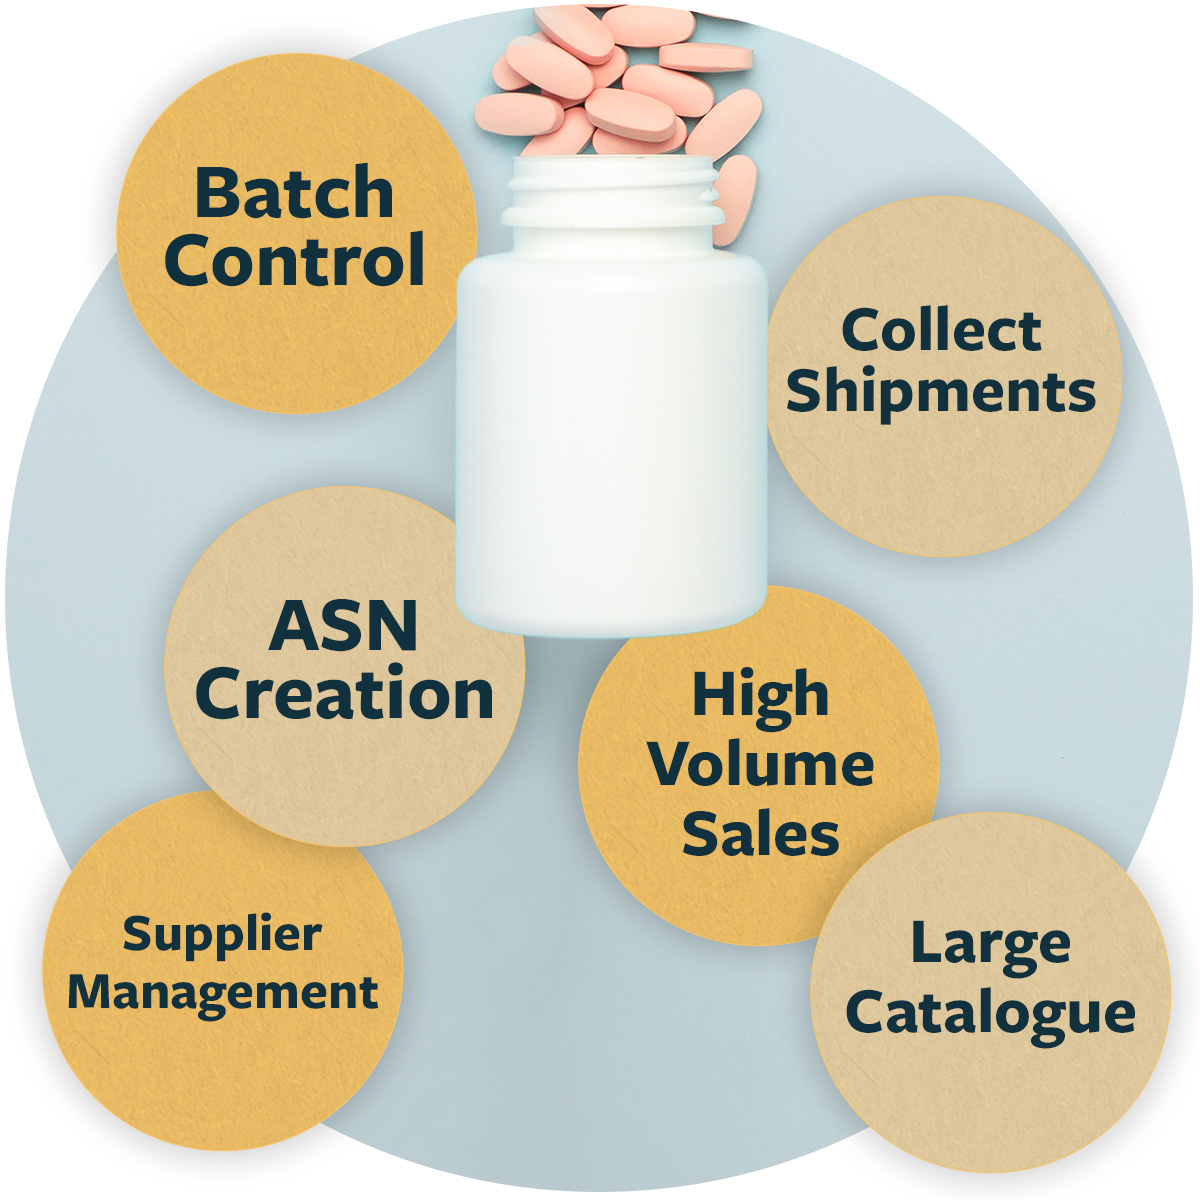 case study image showing Batch Control, ASN Creation, Supplier Management, Collect Shipments, High Volume Sales and a Large Catalogue